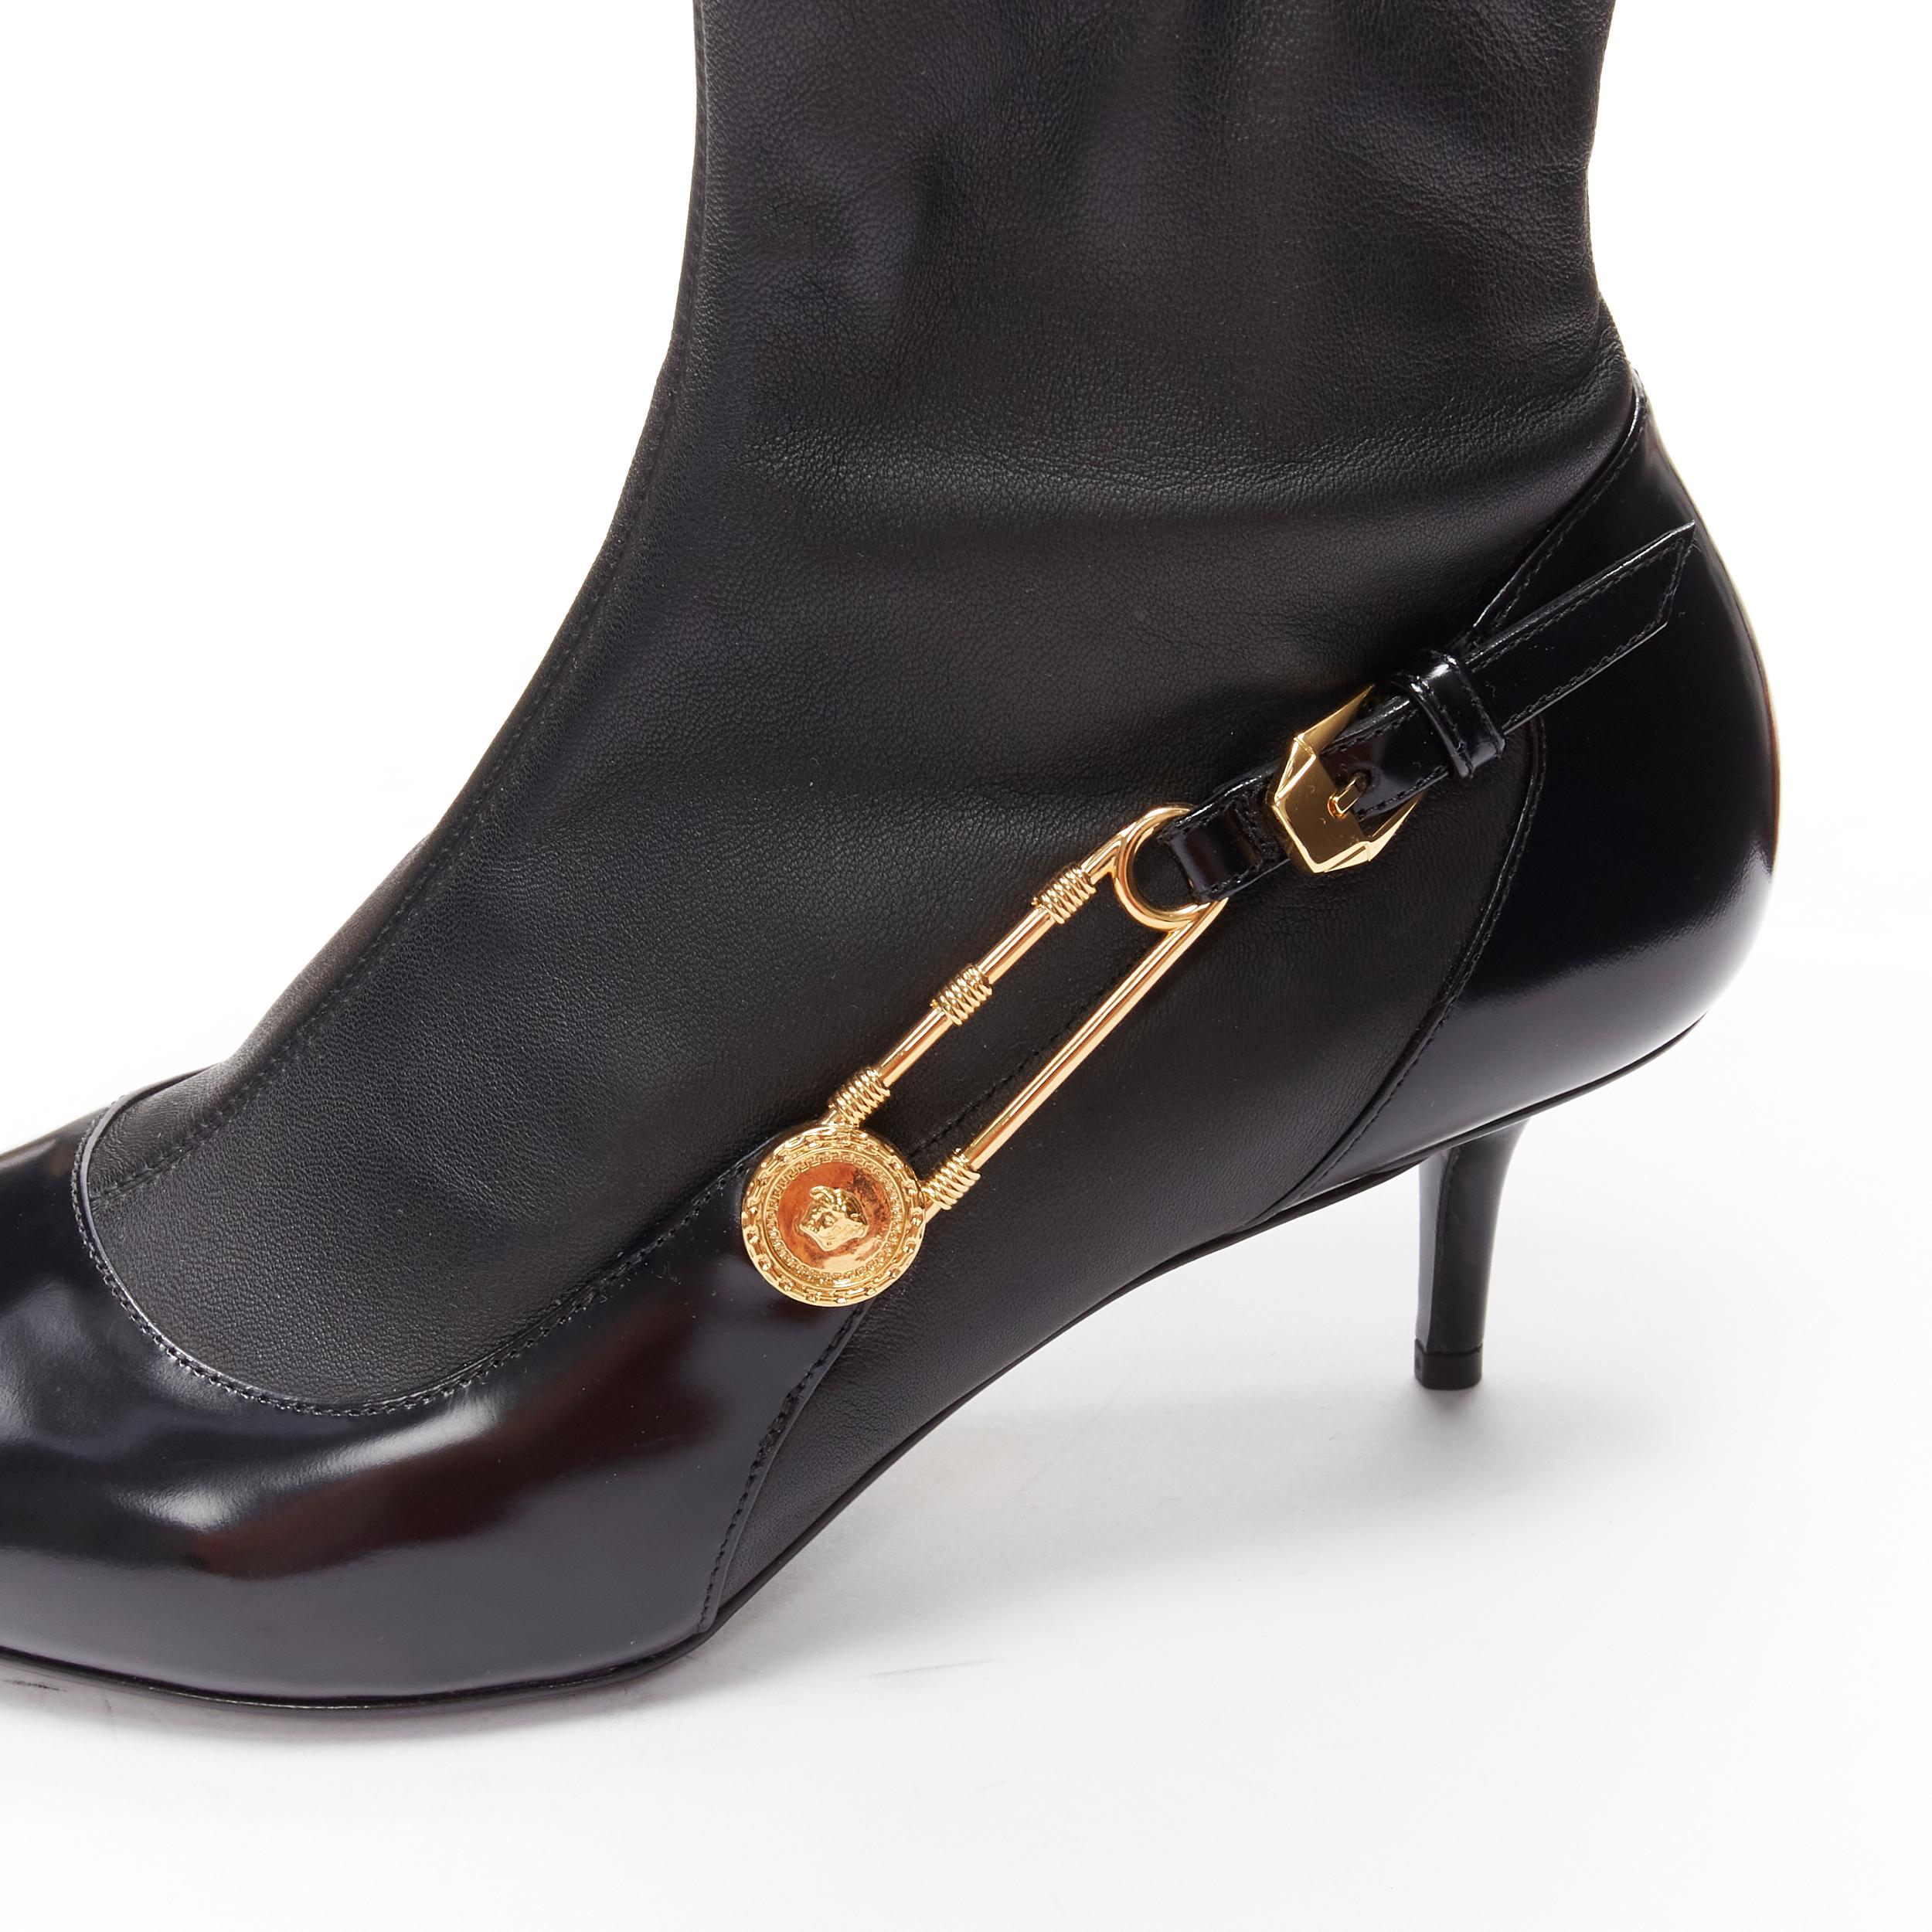 new VERSACE gold Medusa Punk Safety Pin black leather kitten heel bootie EU38
Reference: TGAS/C01795
Brand: Versace
Designer: Donatella Versace
Model: DST422H DNA28 D41OH
Material: Leather
Color: Black
Pattern: Solid
Extra Details: Soft leather sock